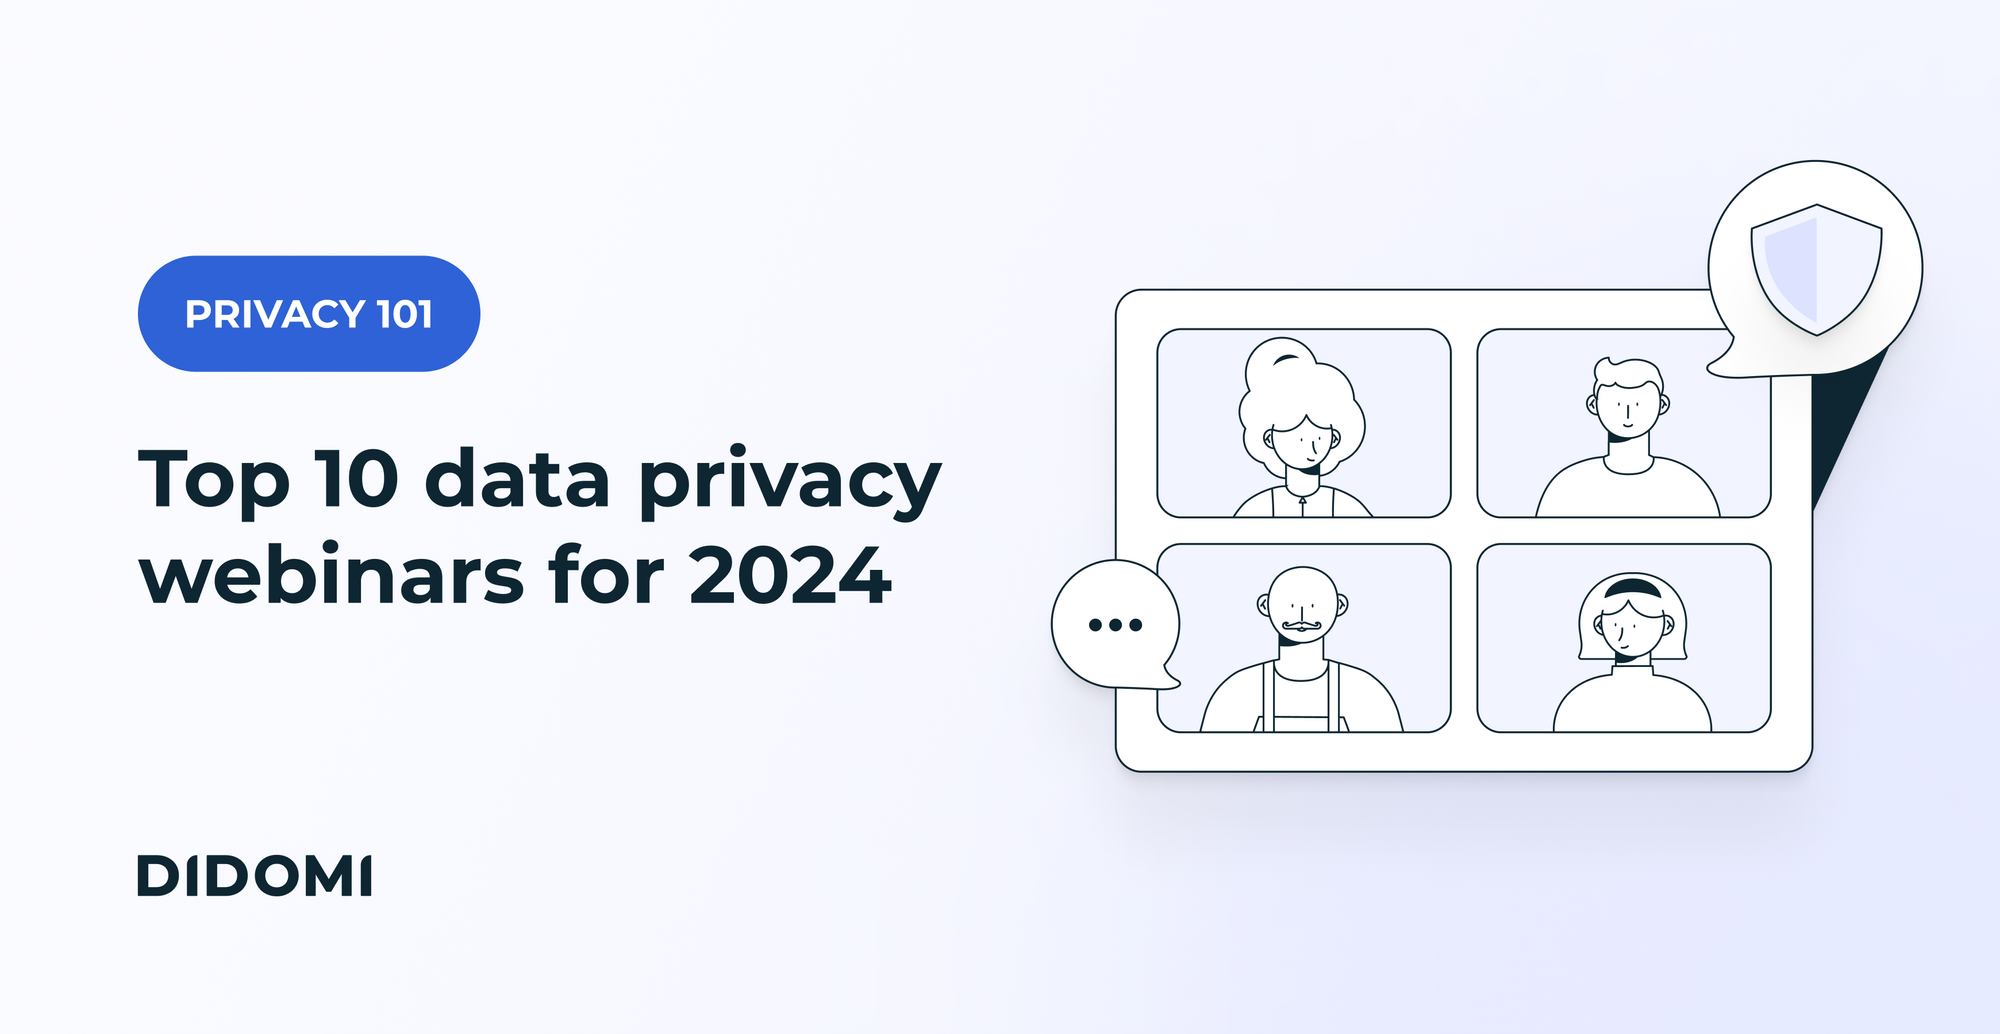 On the right side of the image, a drazing of a webinar, with a laptop and four people in their respective frames. On the left side, the label "Privacy 101" and the title "Top 10 data privacy webinars for 2024"